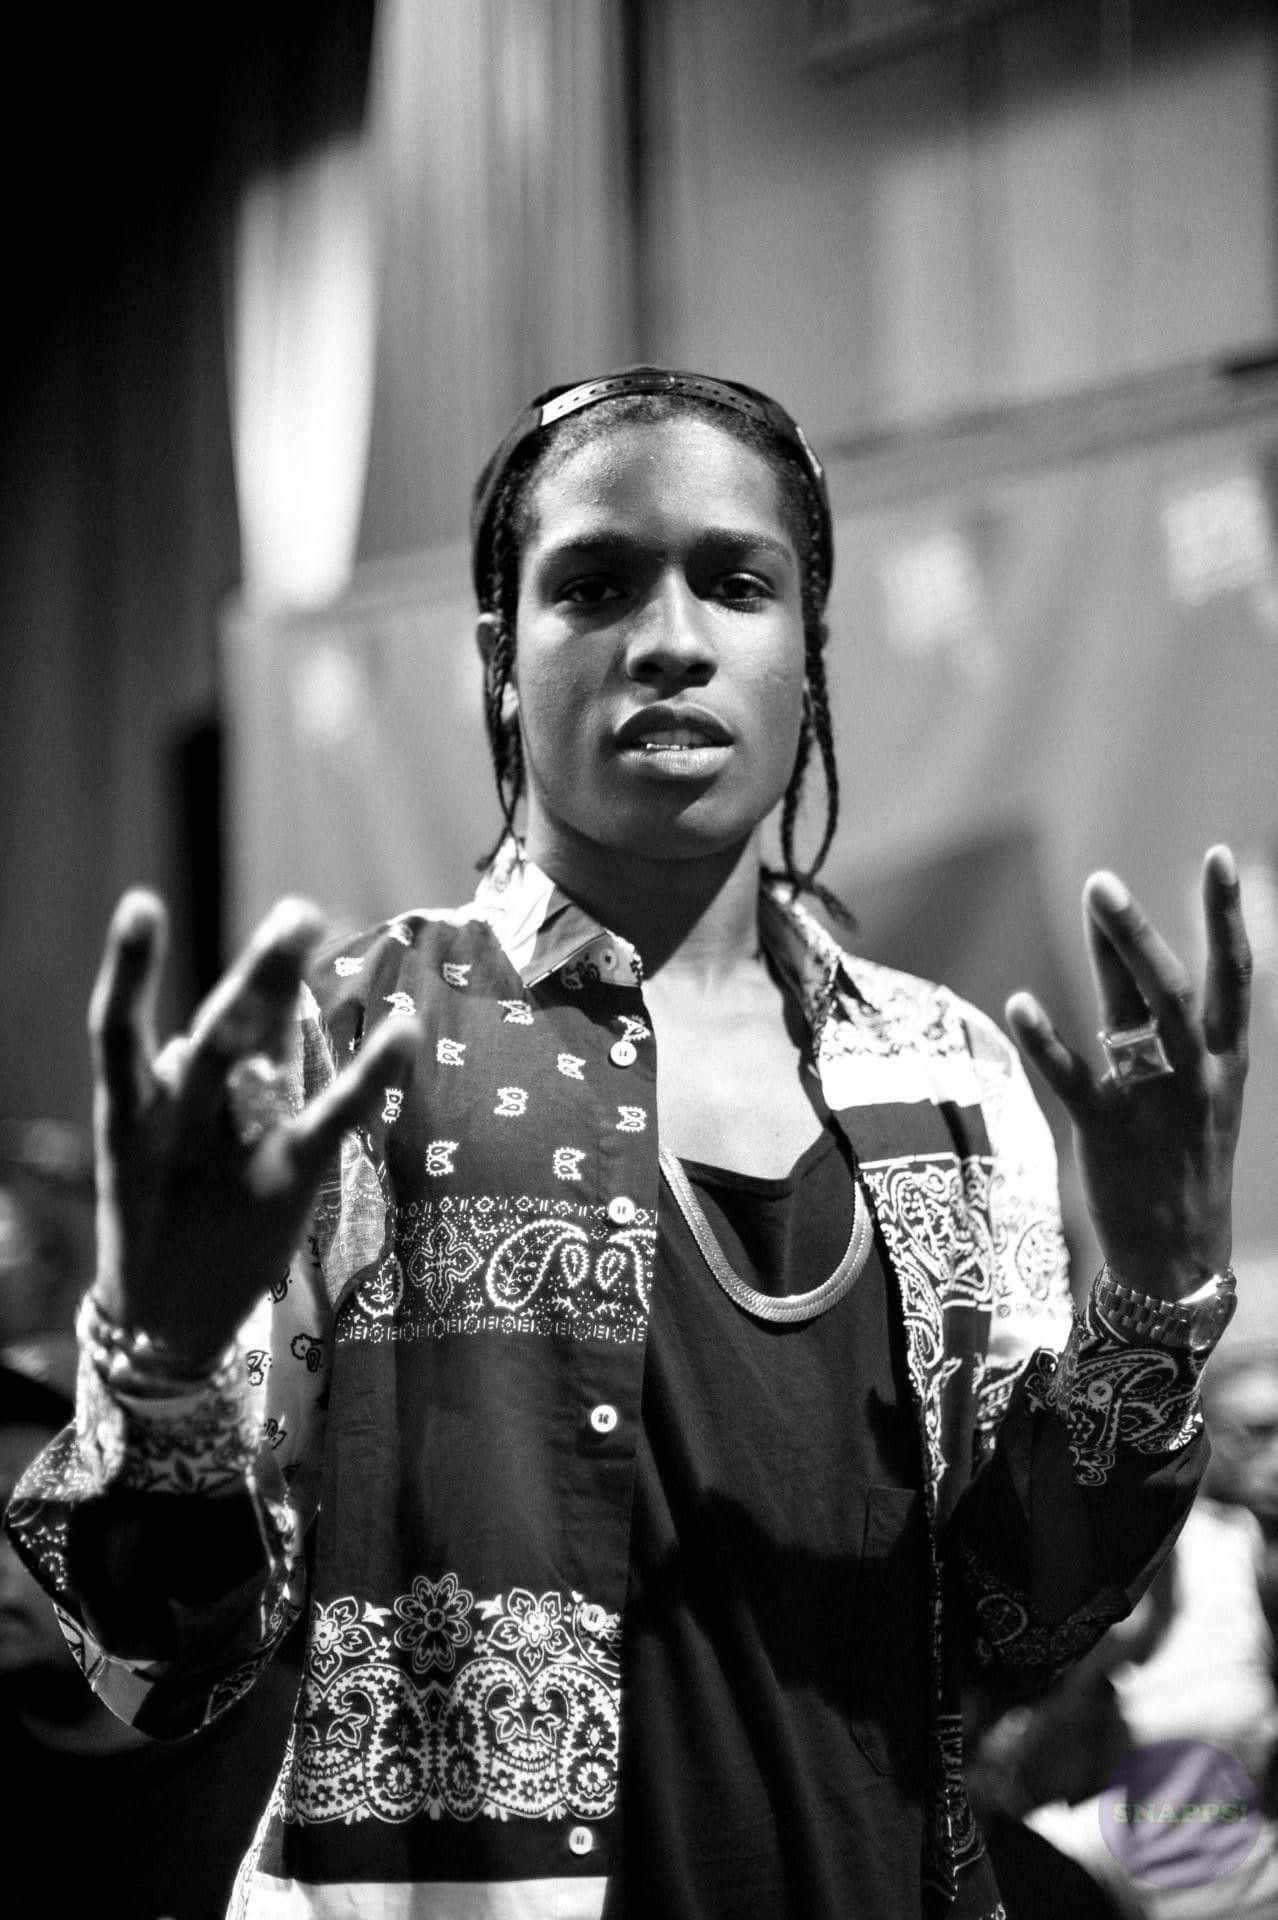 ASAP Rocky promotes his latest hit single.